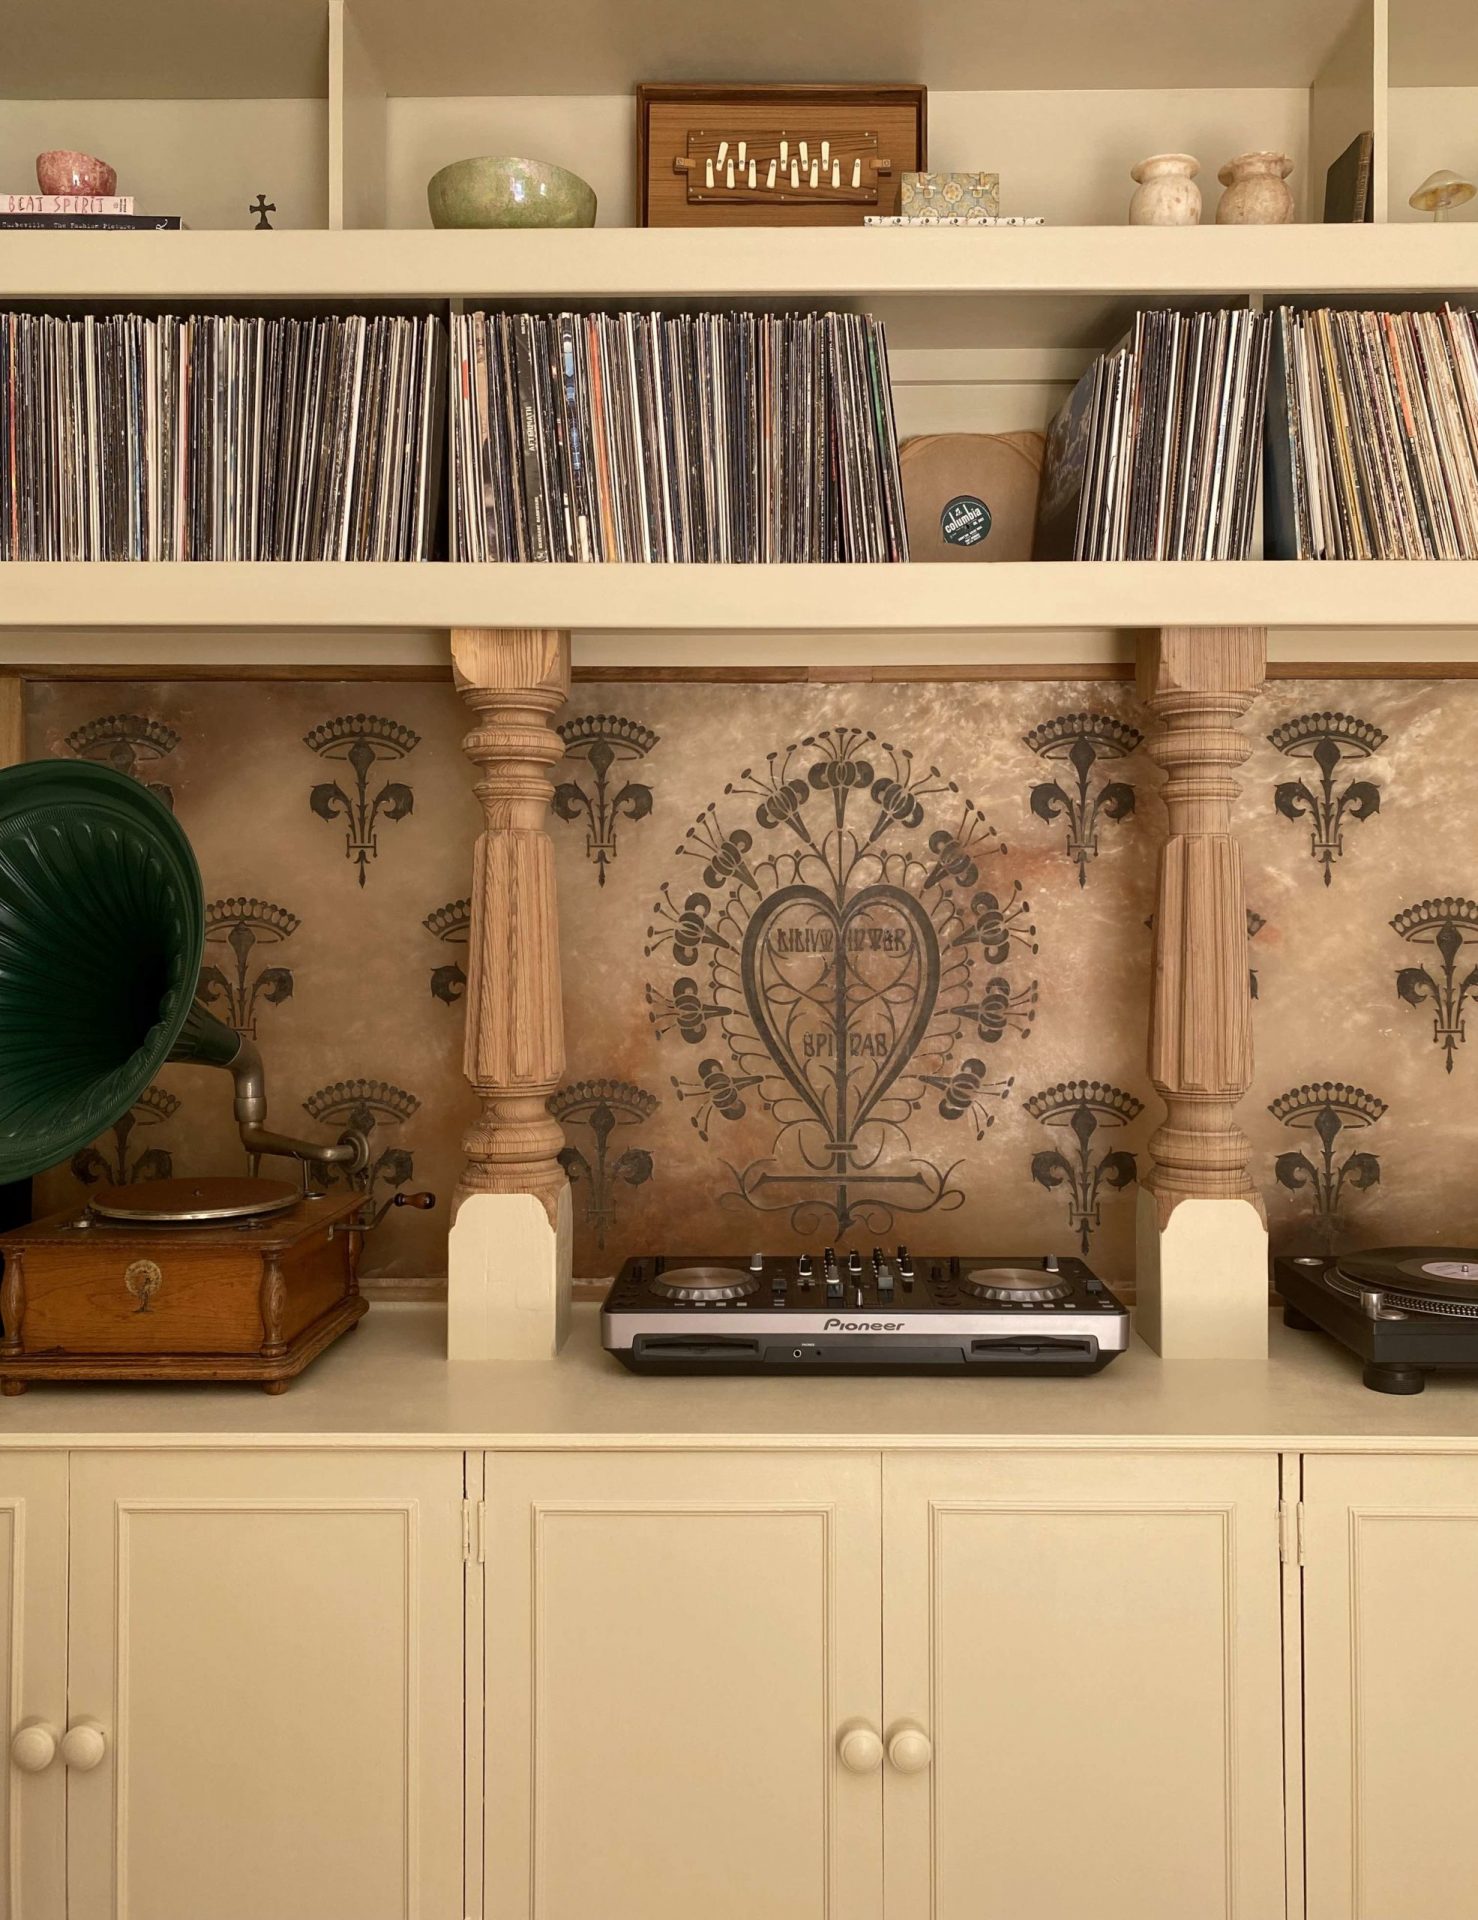 Reclaimed listening rooms and our vinyl shrine